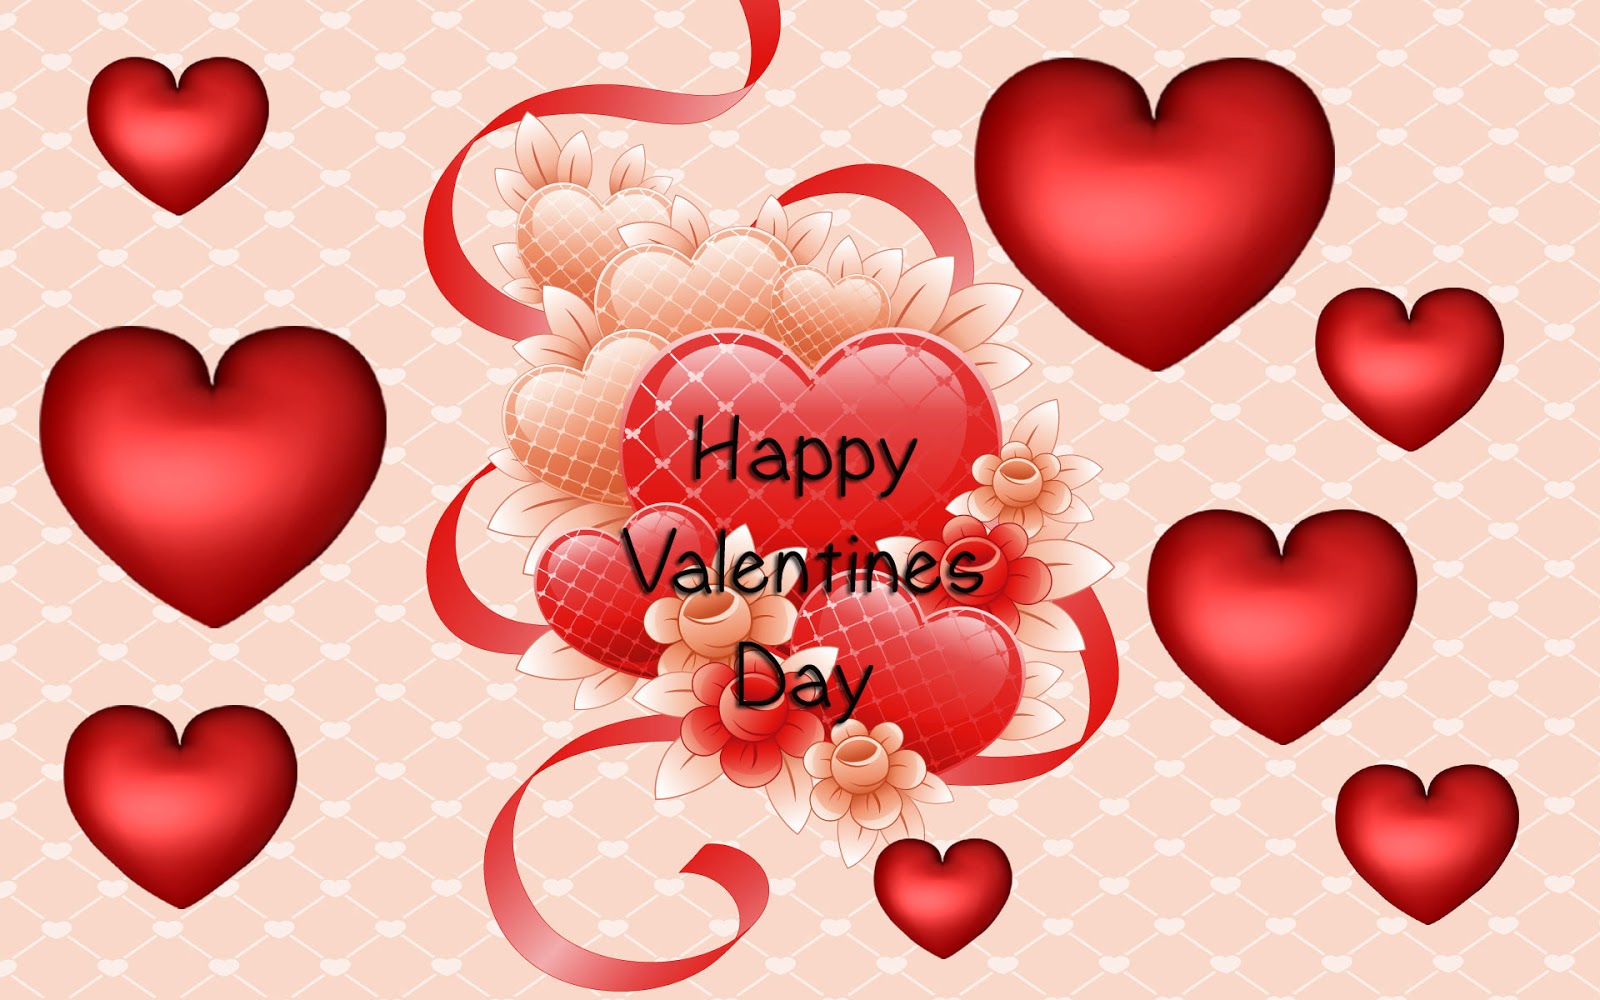 Online Wallpapers Shop: Valentines Day Wallpaper, Photos 14th Feb 2013